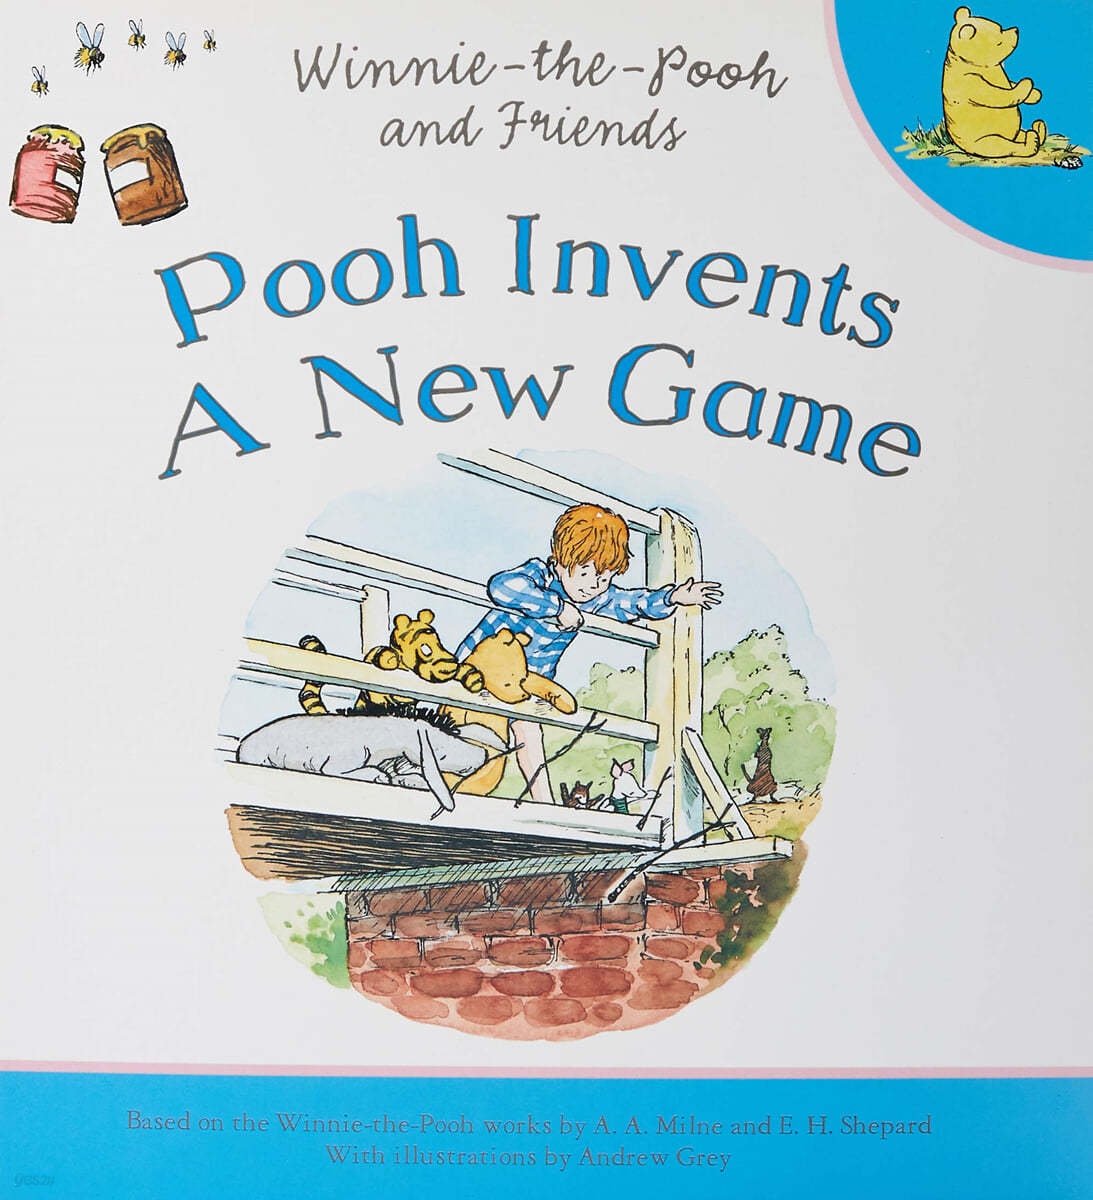 Winnie-the-pooh: Pooh Invents a New Game